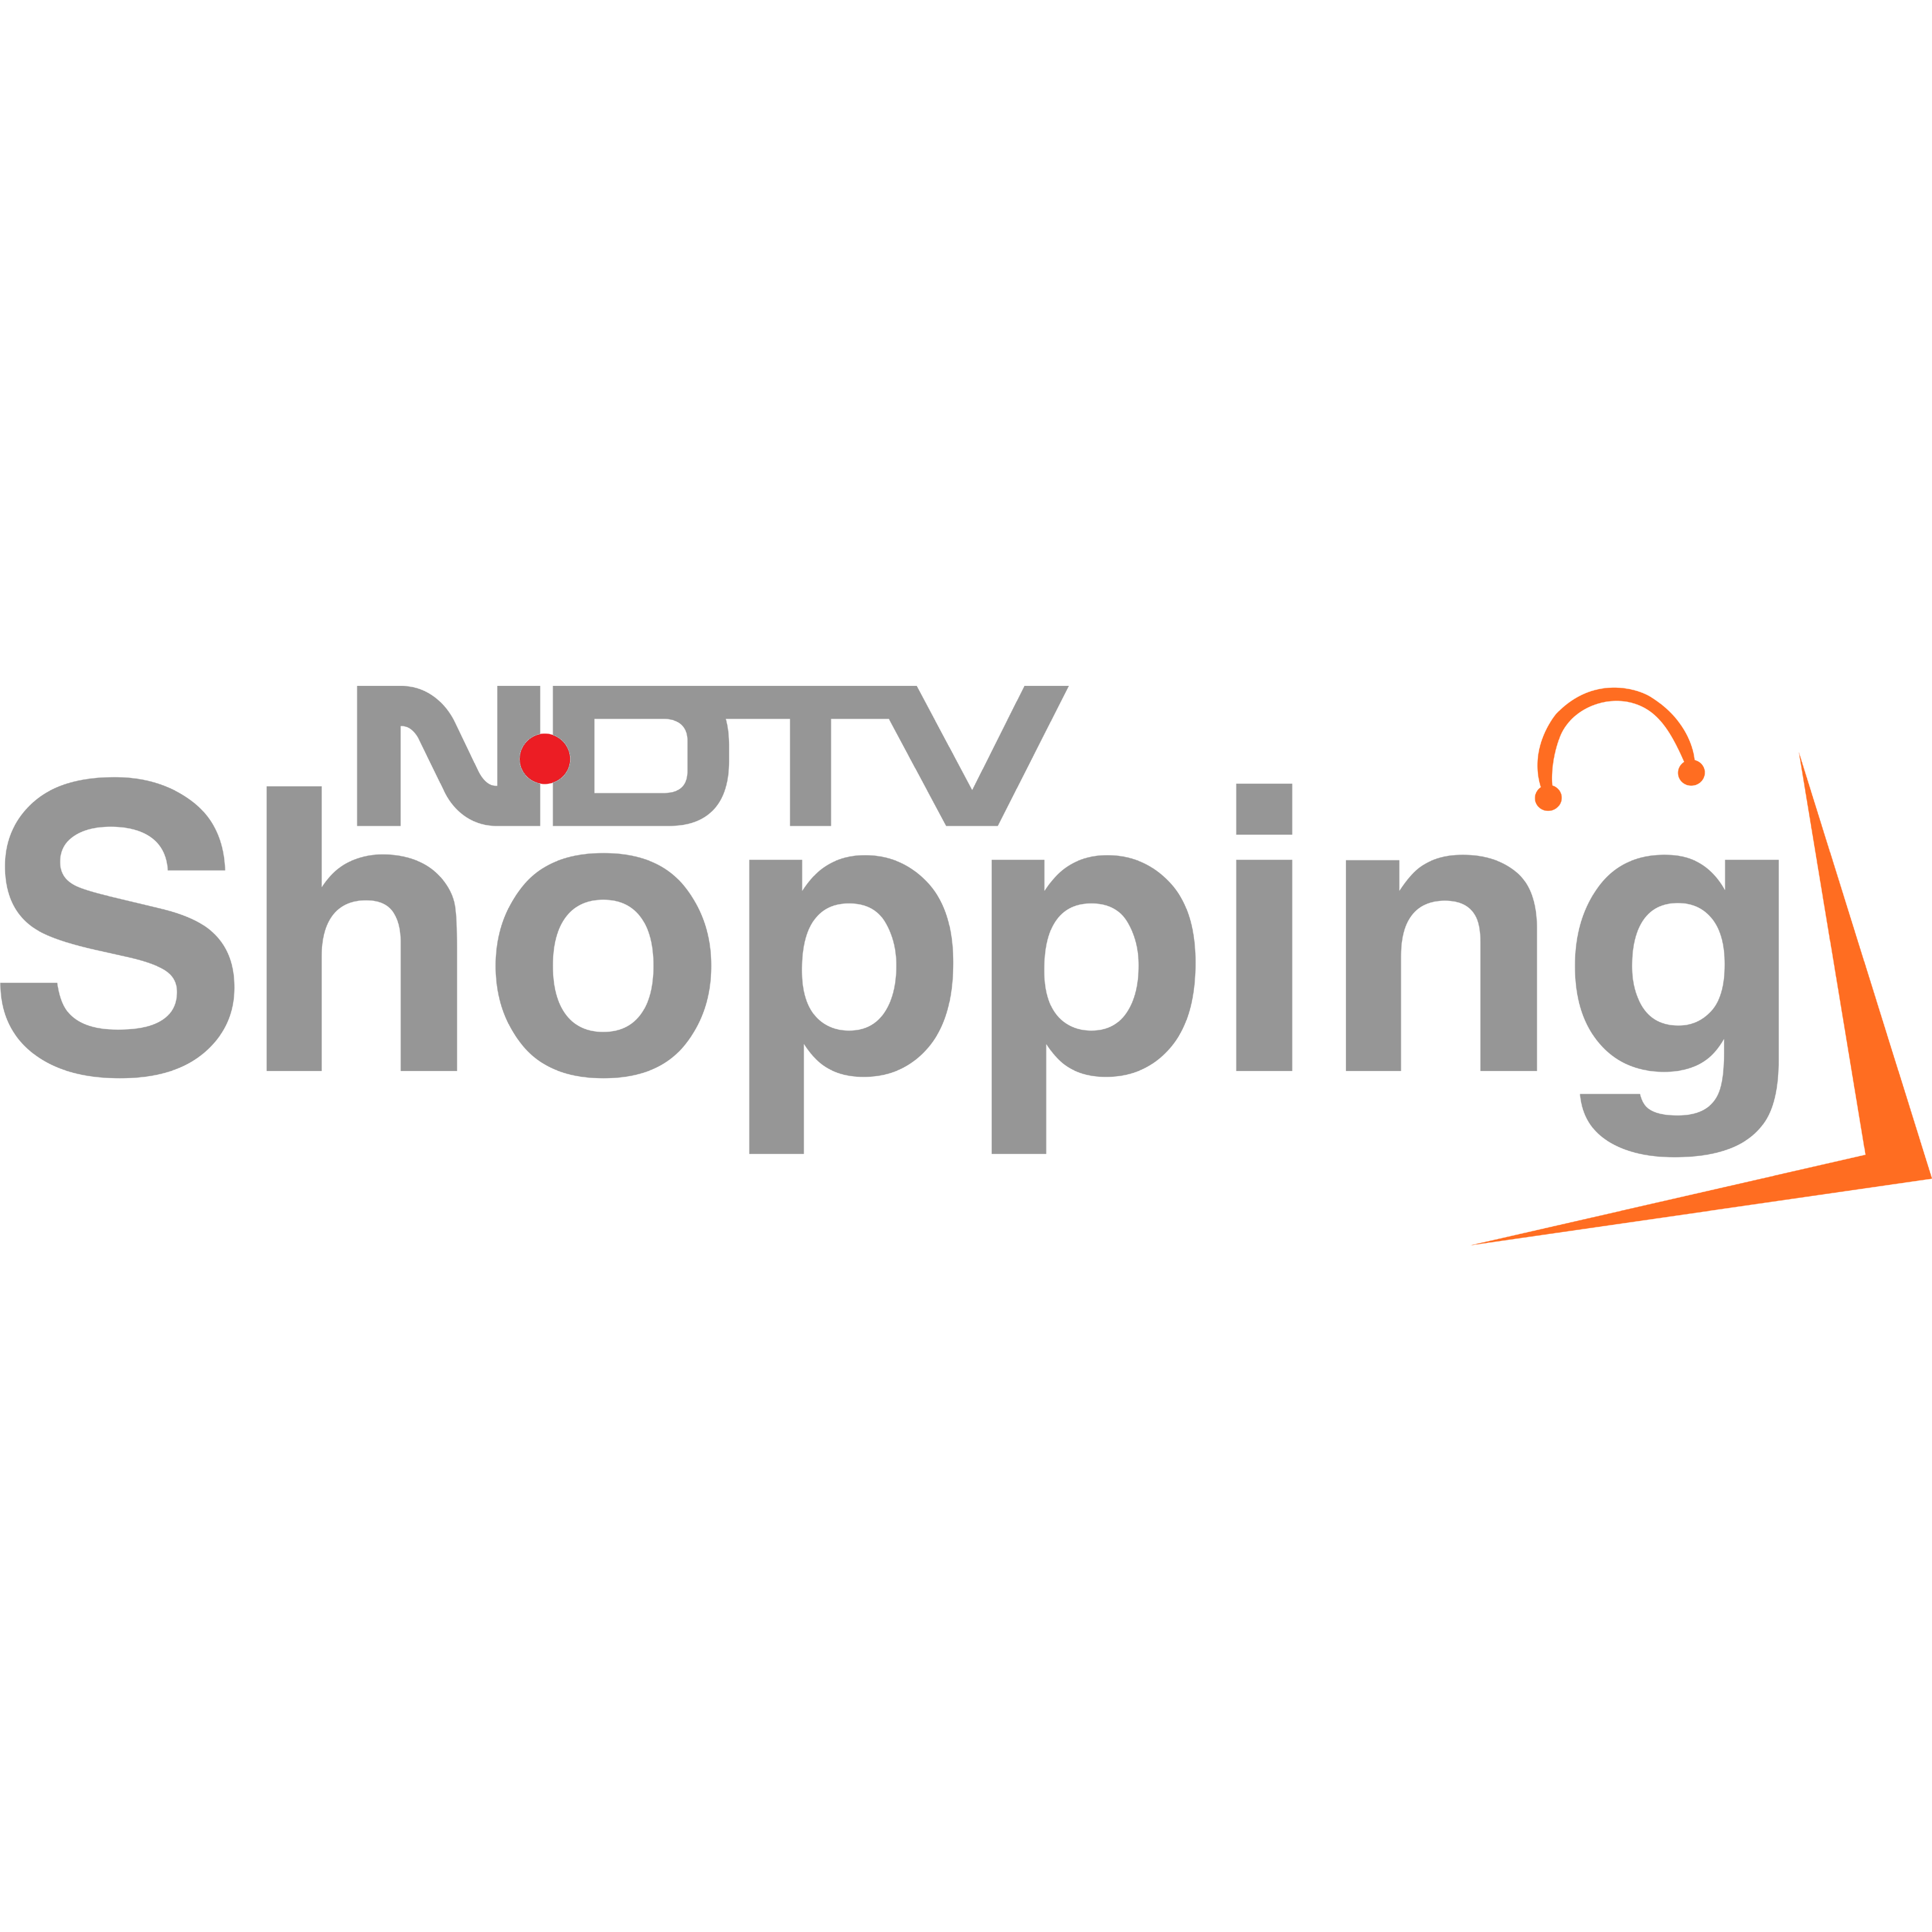 NDTV Shopping Logo Transparent Picture